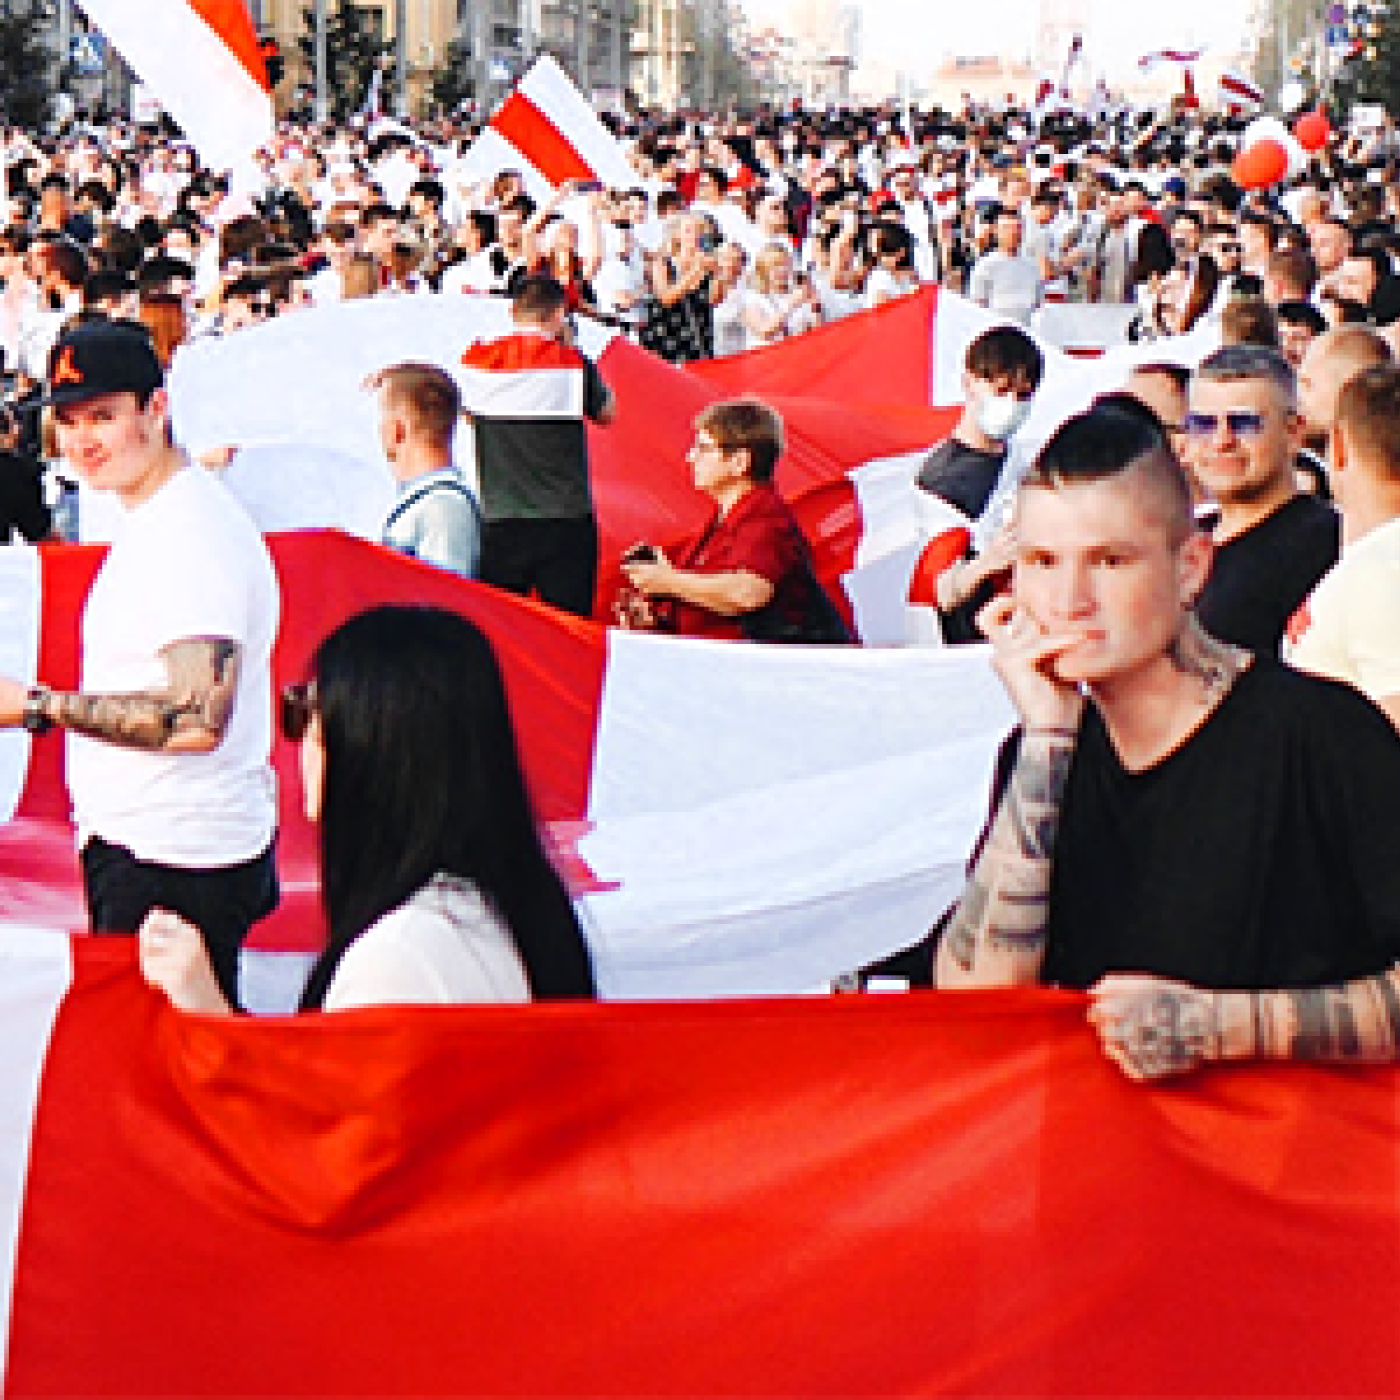 Belarusians participate in a demonstration.